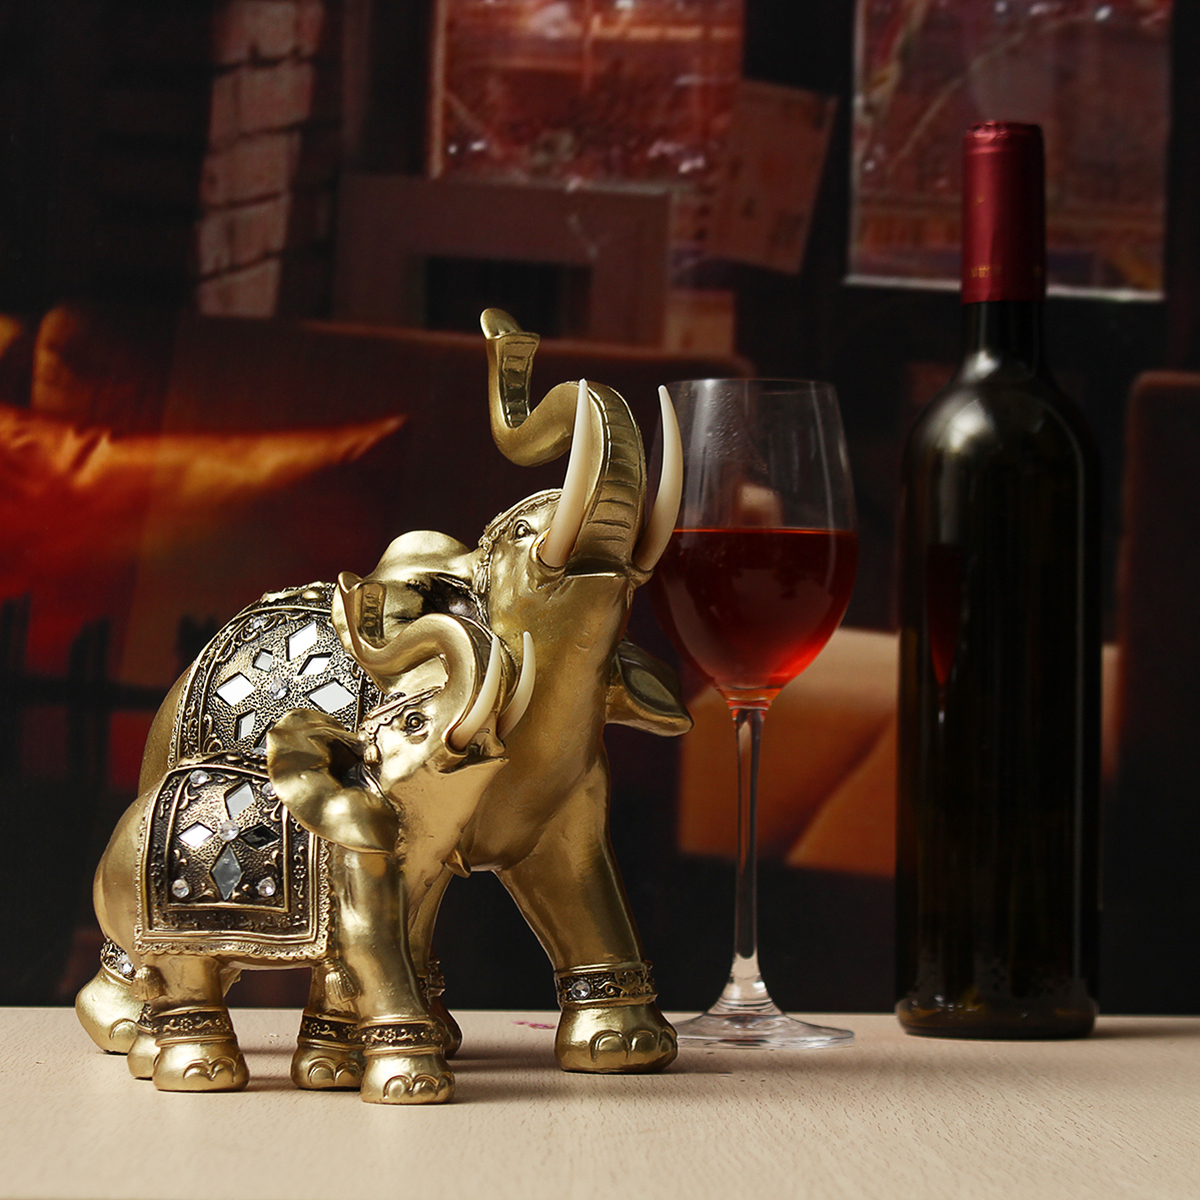 Lucky-Charm-Fengshui-Mascot-Golden-Elephant-Resin-Mini-Statue-Home-Desk-Ornaments-Gifts-Home-Decorat-1634232-3